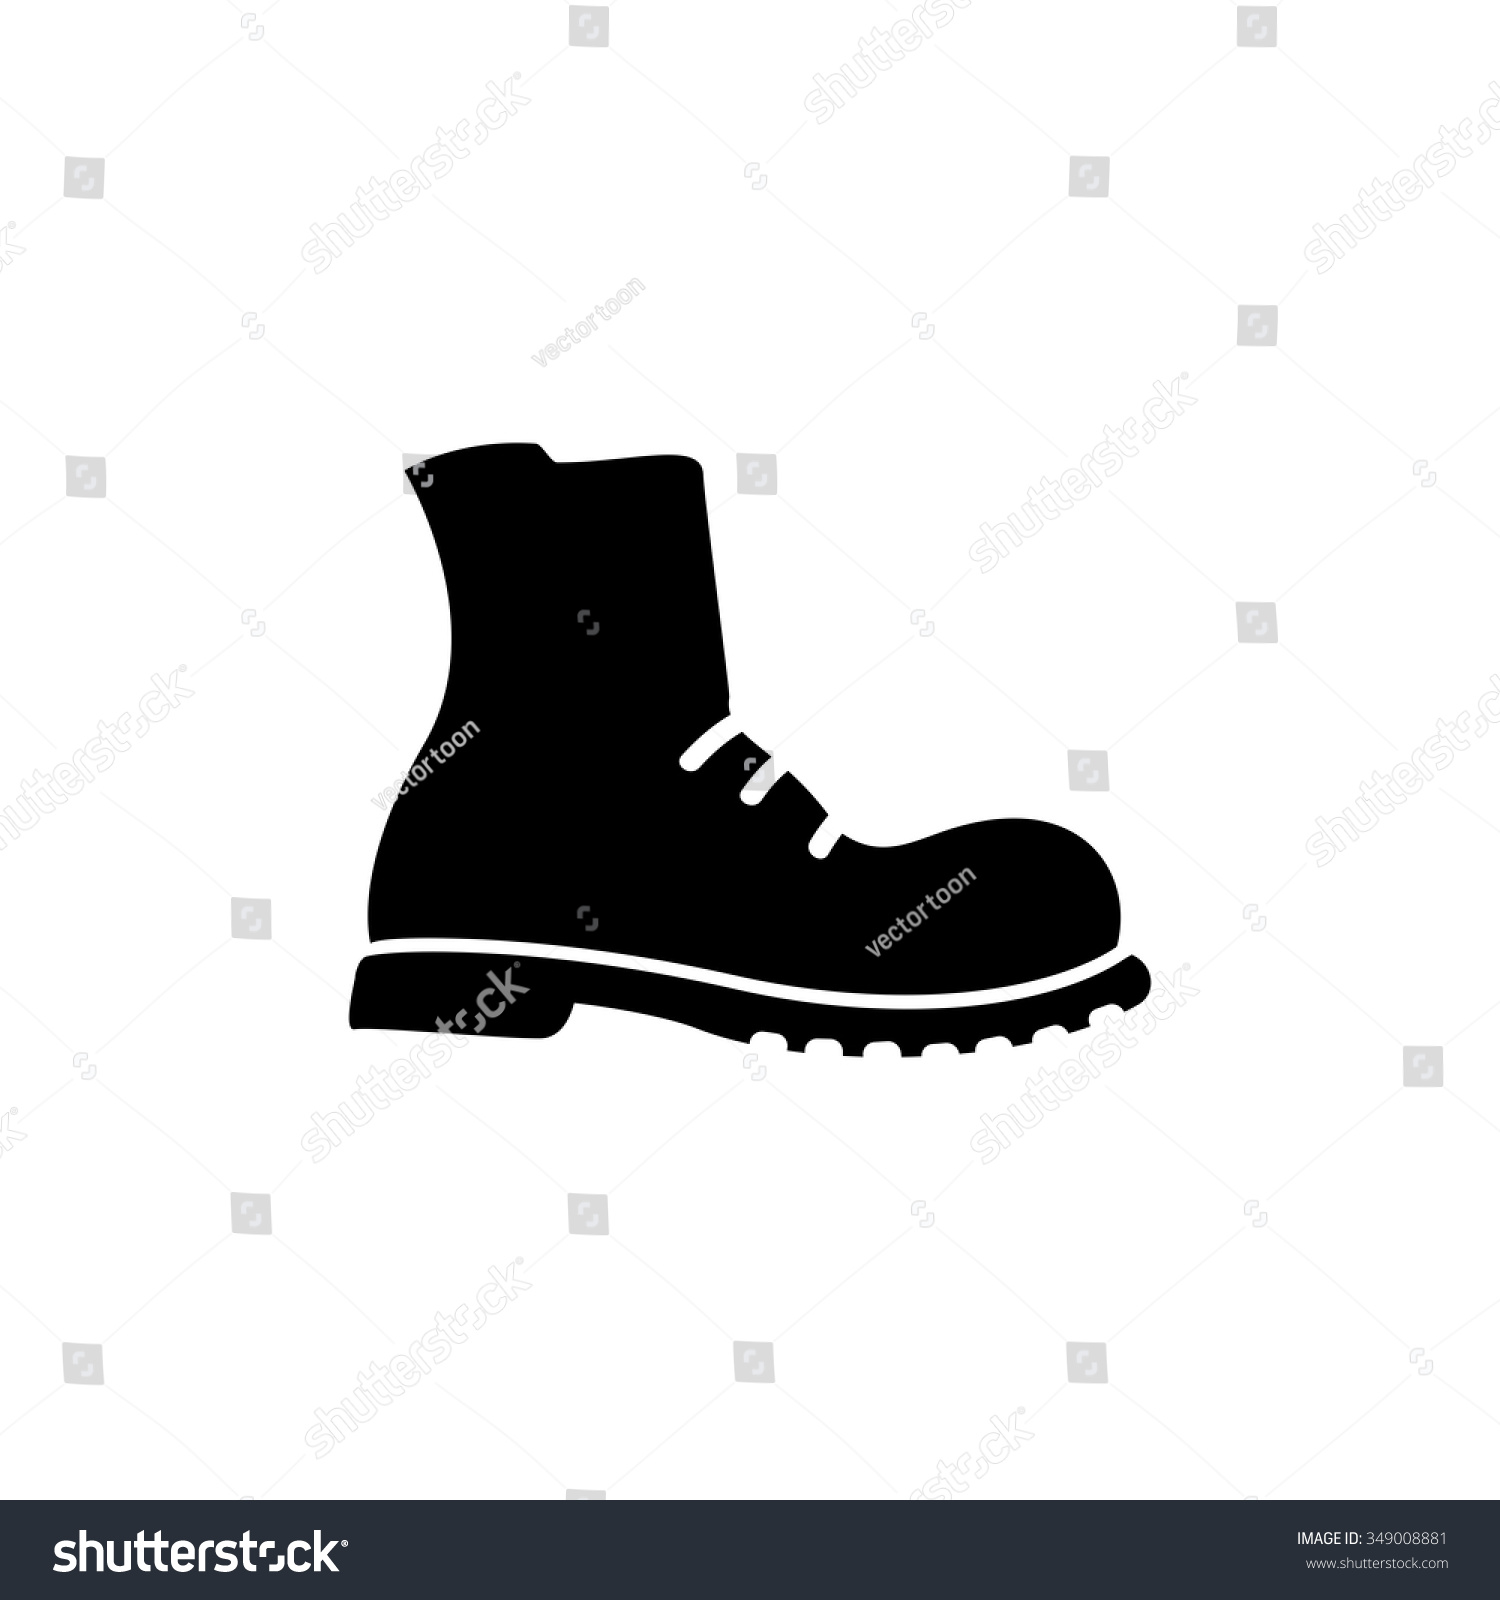 Military Shoes Icon Stock Vector (Royalty Free) 349008881